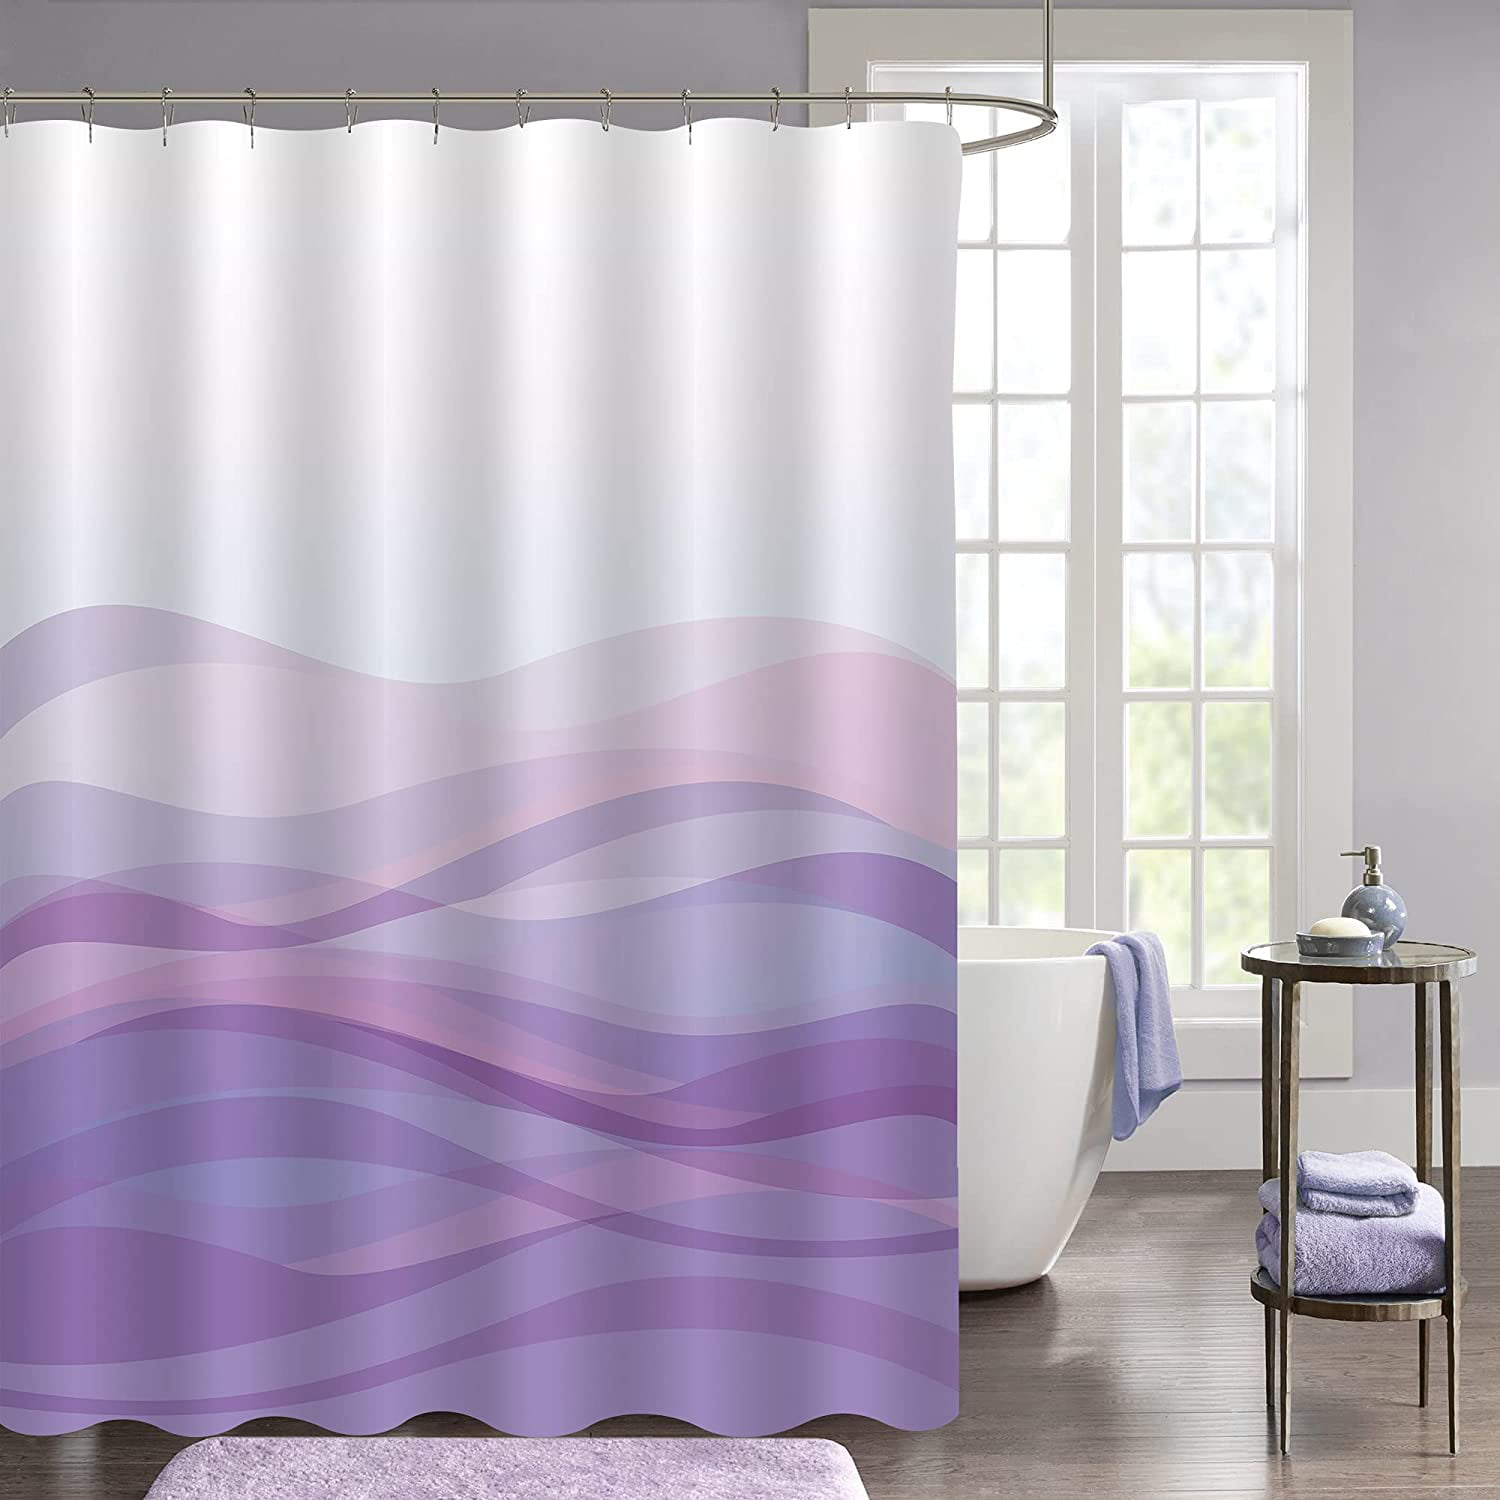 72 x72‘ Pink Geomertic Shower Curtain for Bathroom Multicolor Red Pink Orange Art Striped Iridescent Bathroom Curtains Fabric Waterproof Decoration